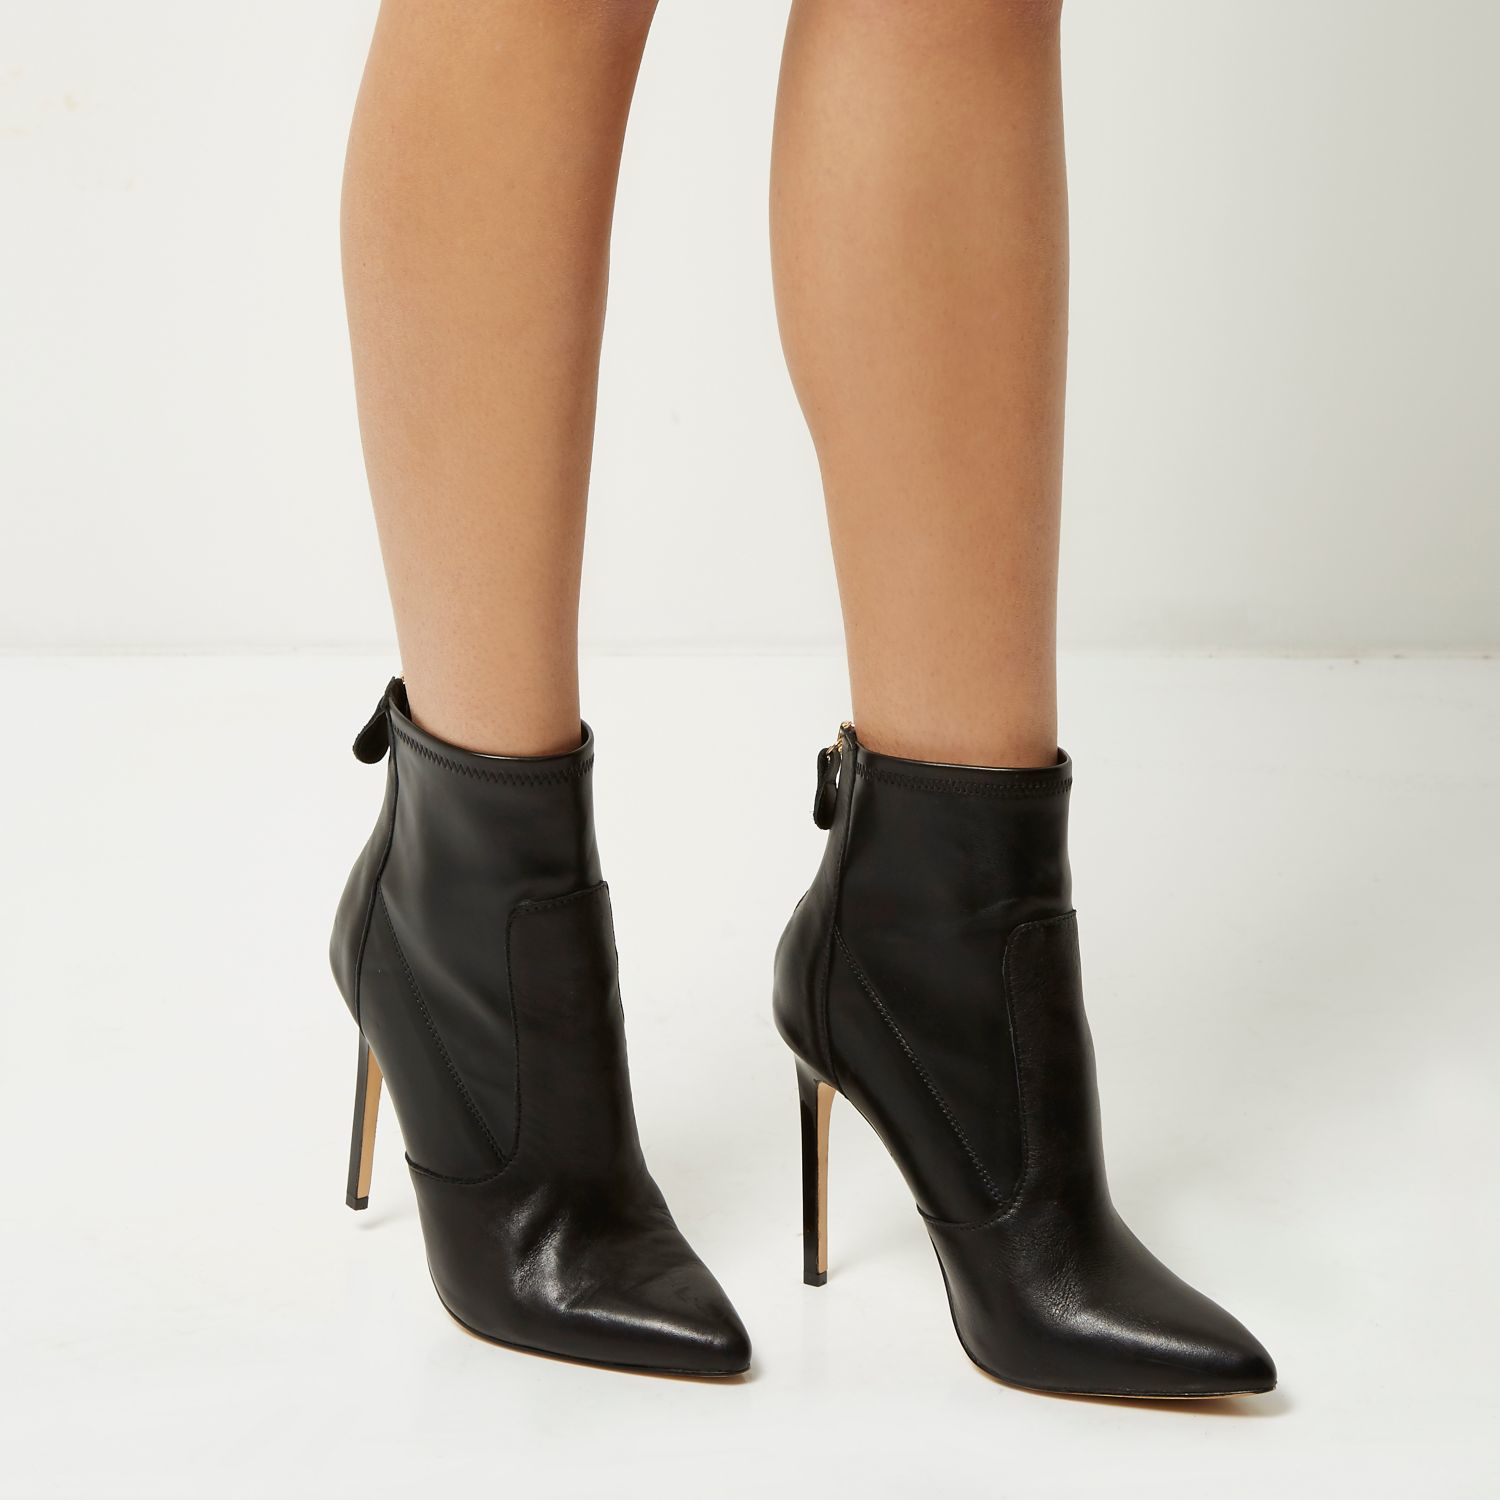 River Island Black Leather Stretch Heeled Ankle Boots - Lyst